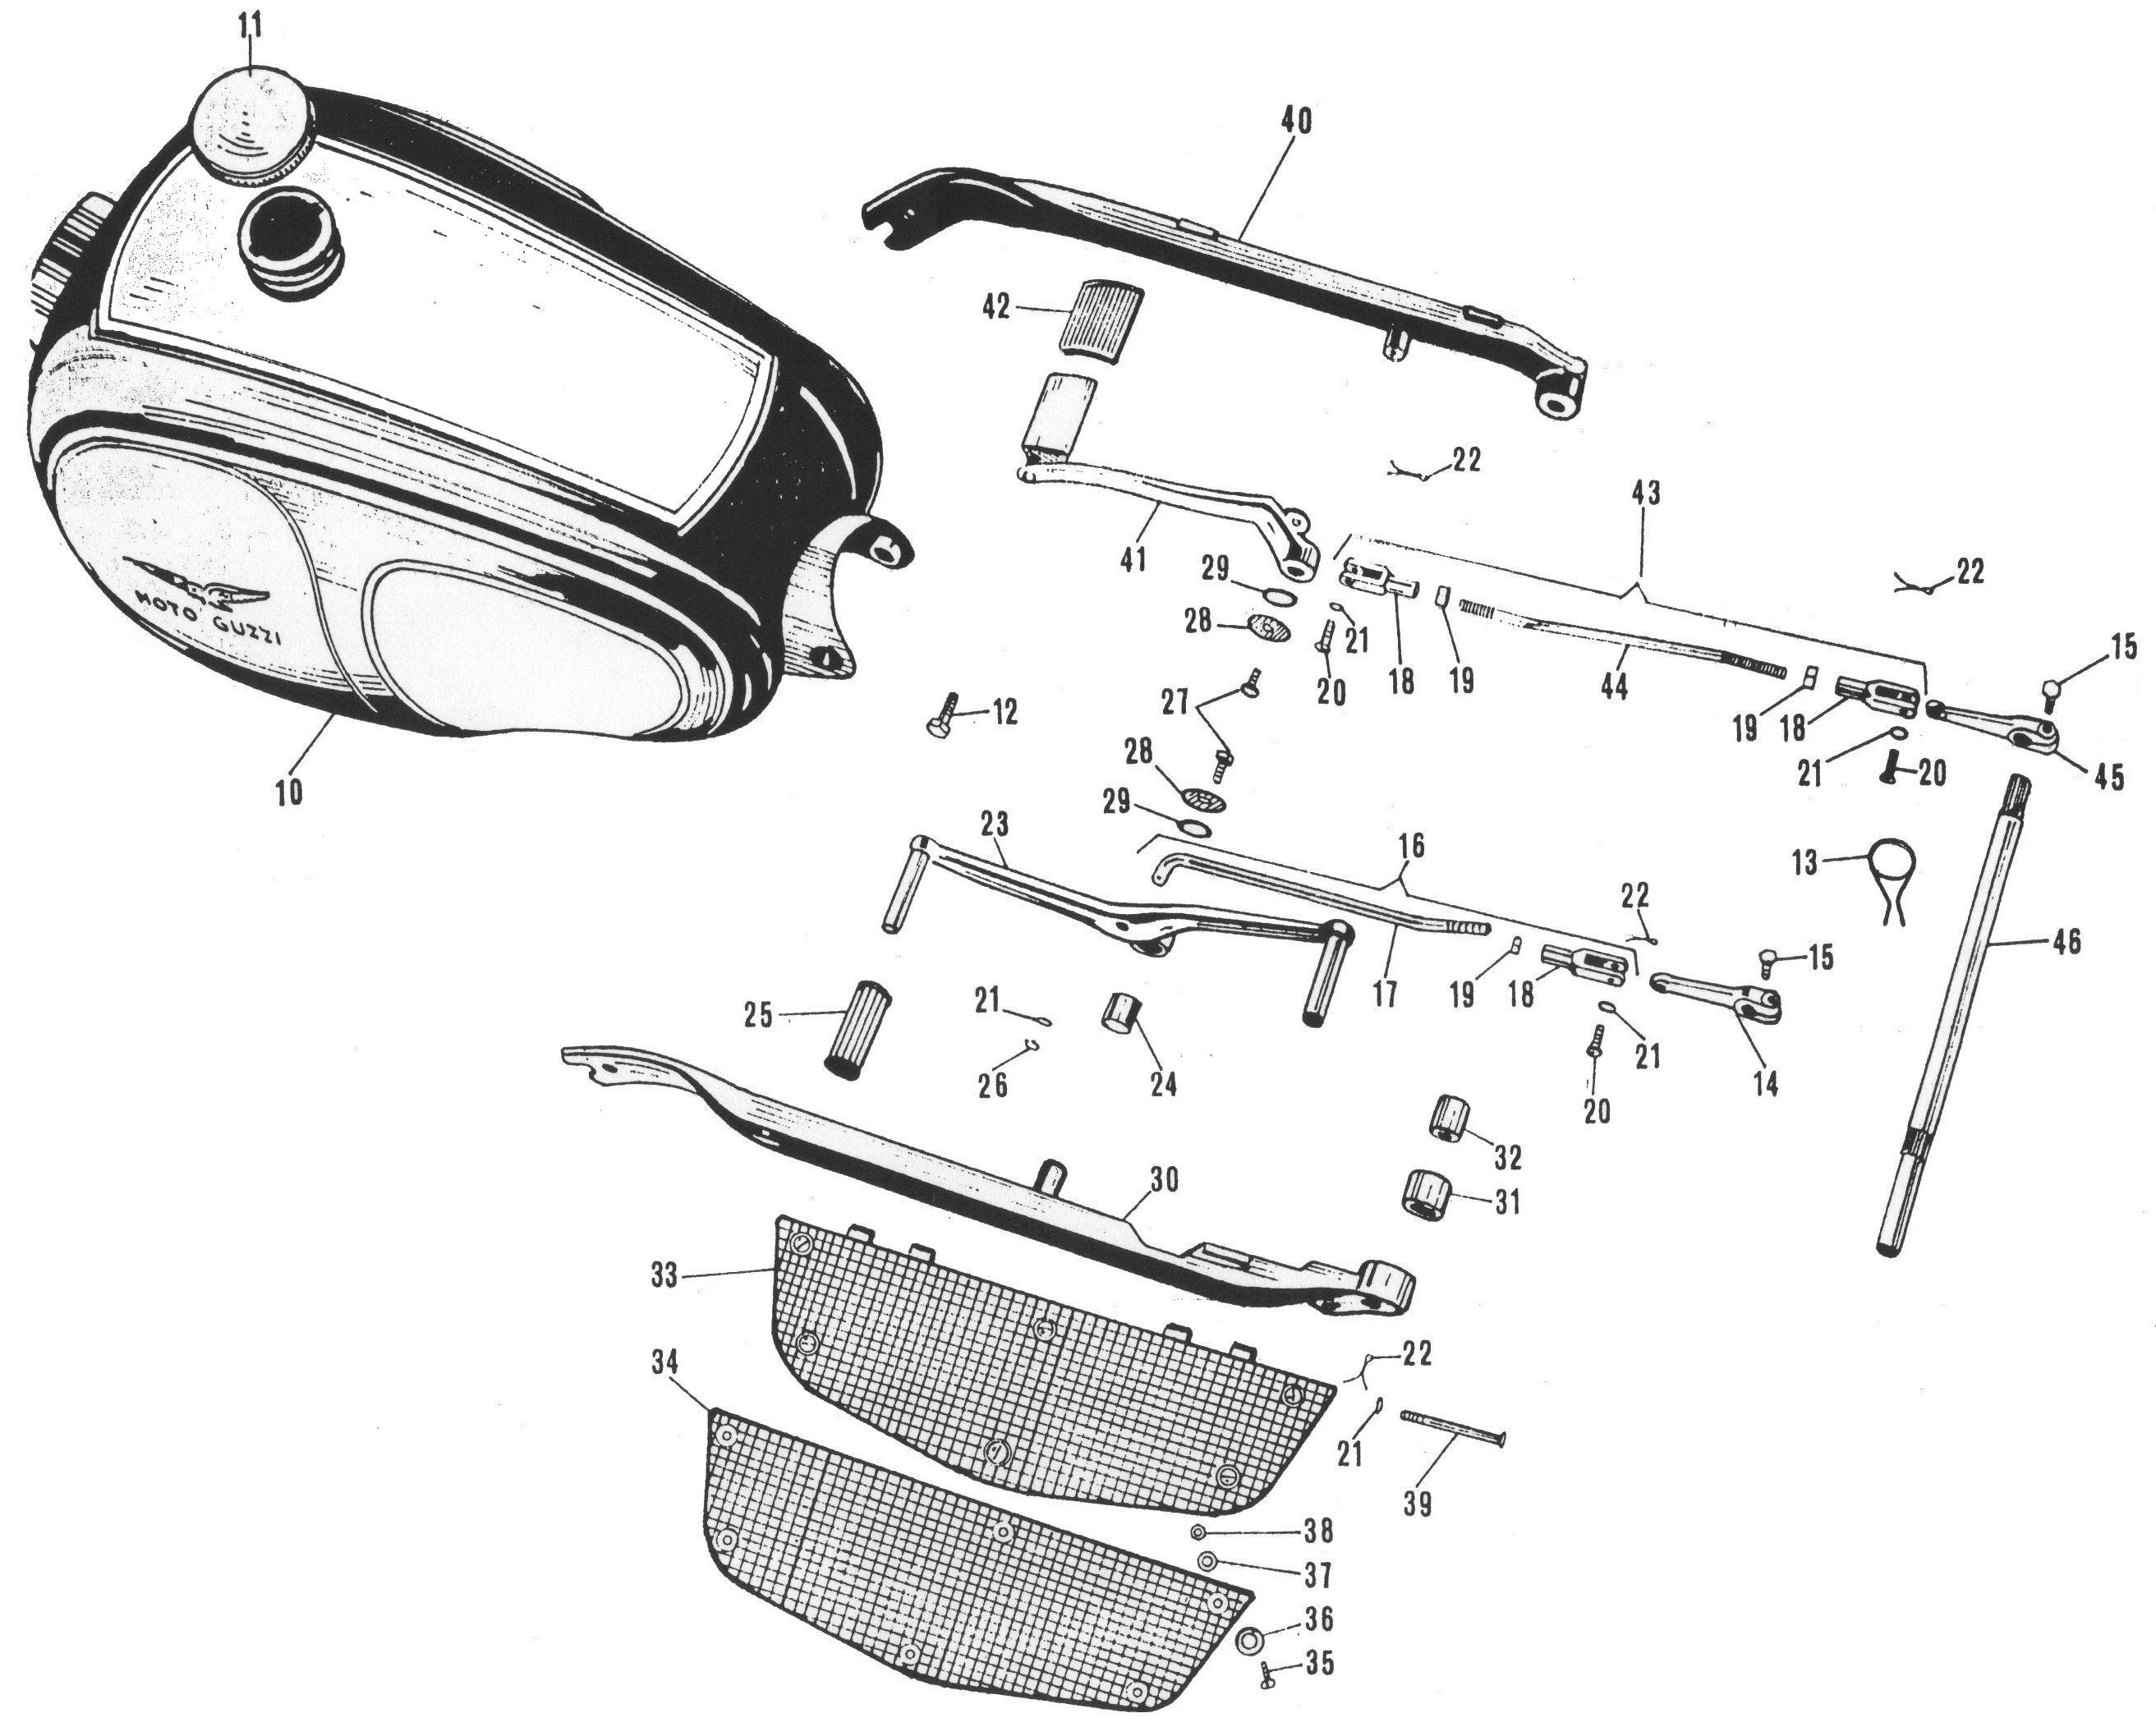 In looking at the Police Supplement to the 850 Spare Parts Catalog (no date on the one I have), I discovered that the Eldorado spare parts catalog shows the shape of the footboard and rails to be very similar to the earlier version shown here. It has holes in the footboard and shows fasteners for securing the mat to the footboard. It also clearly shows the cut-out in the left side frame rail.